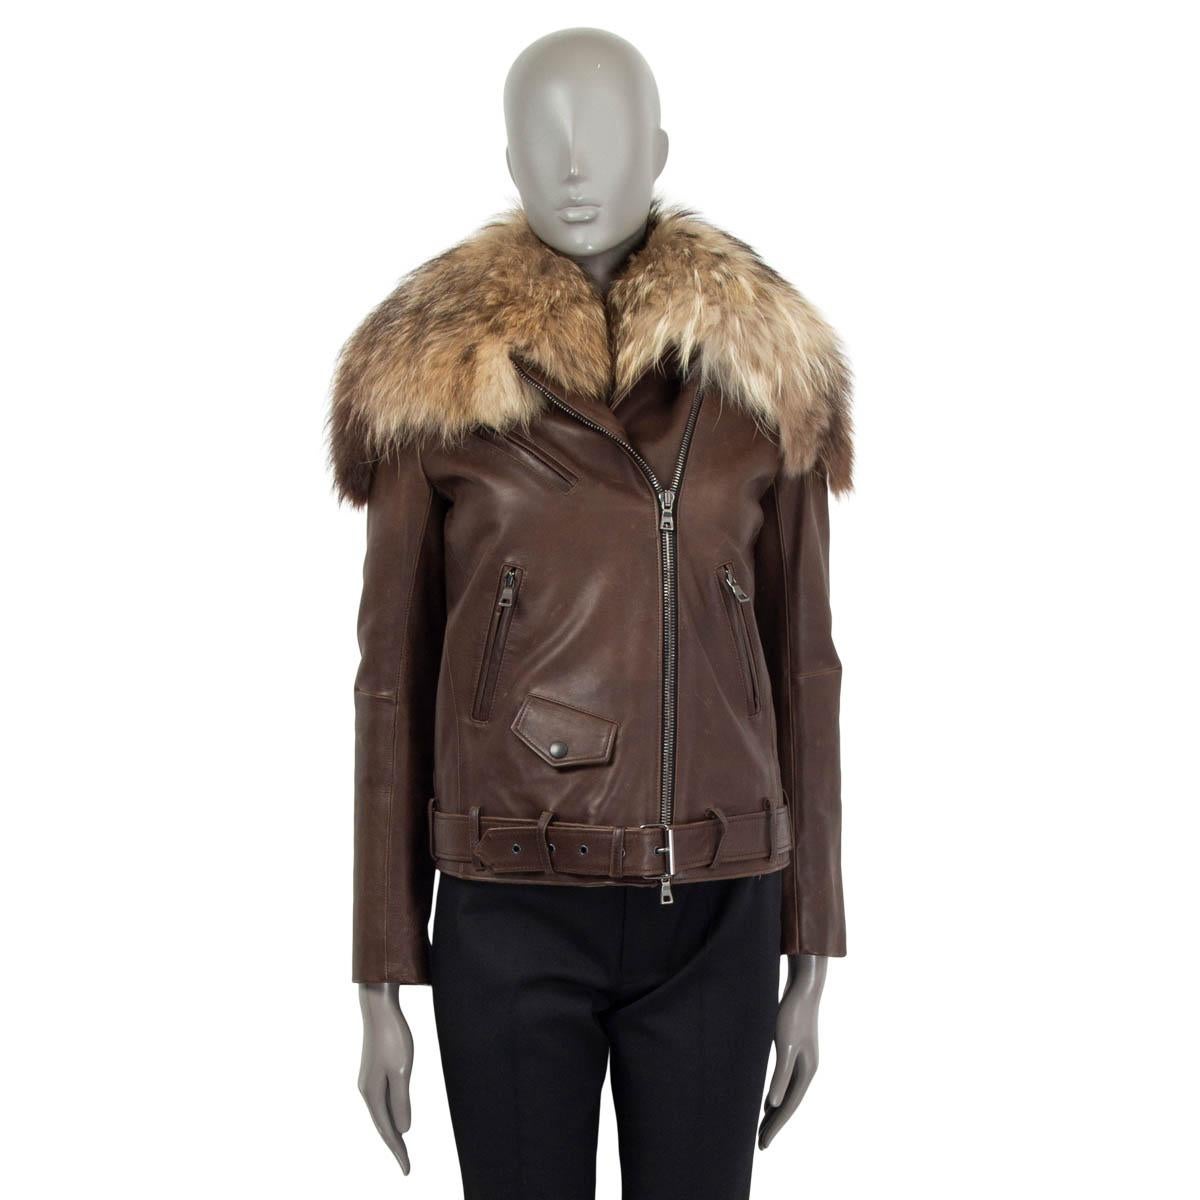 leather jacket with fur sleeves